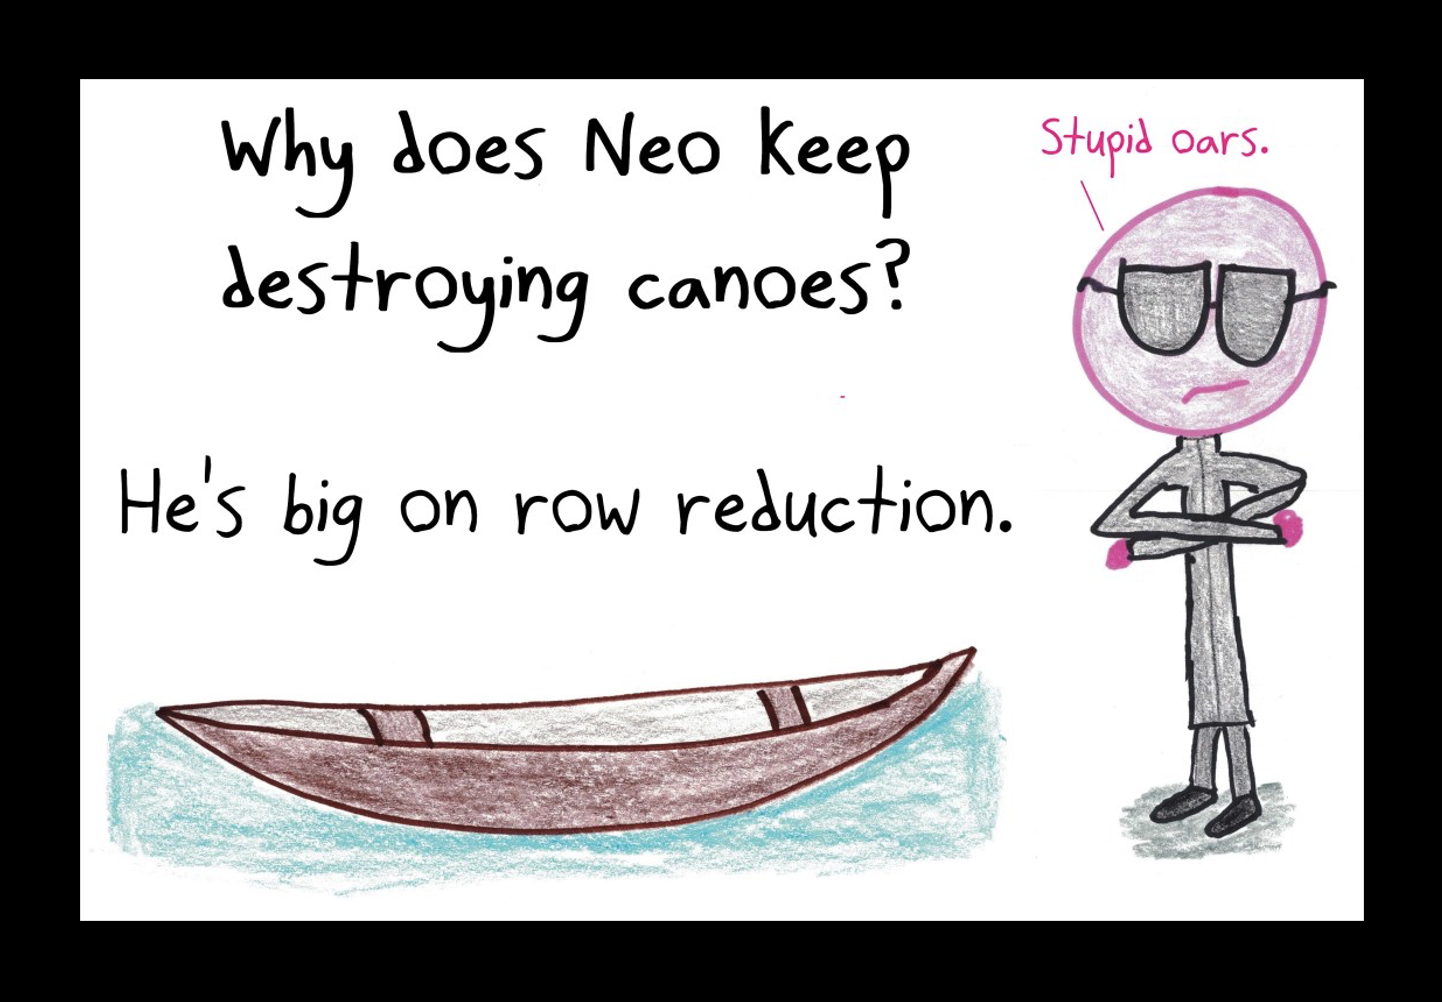 Linear algebra meme: Hand drawing of a stick person next to a floating canoe. Next to it, the caption: 'Why does Neo keep destroying canoes? He's big on row reduction.' And the stick person, Neo, says, 'Stupid oars.' 